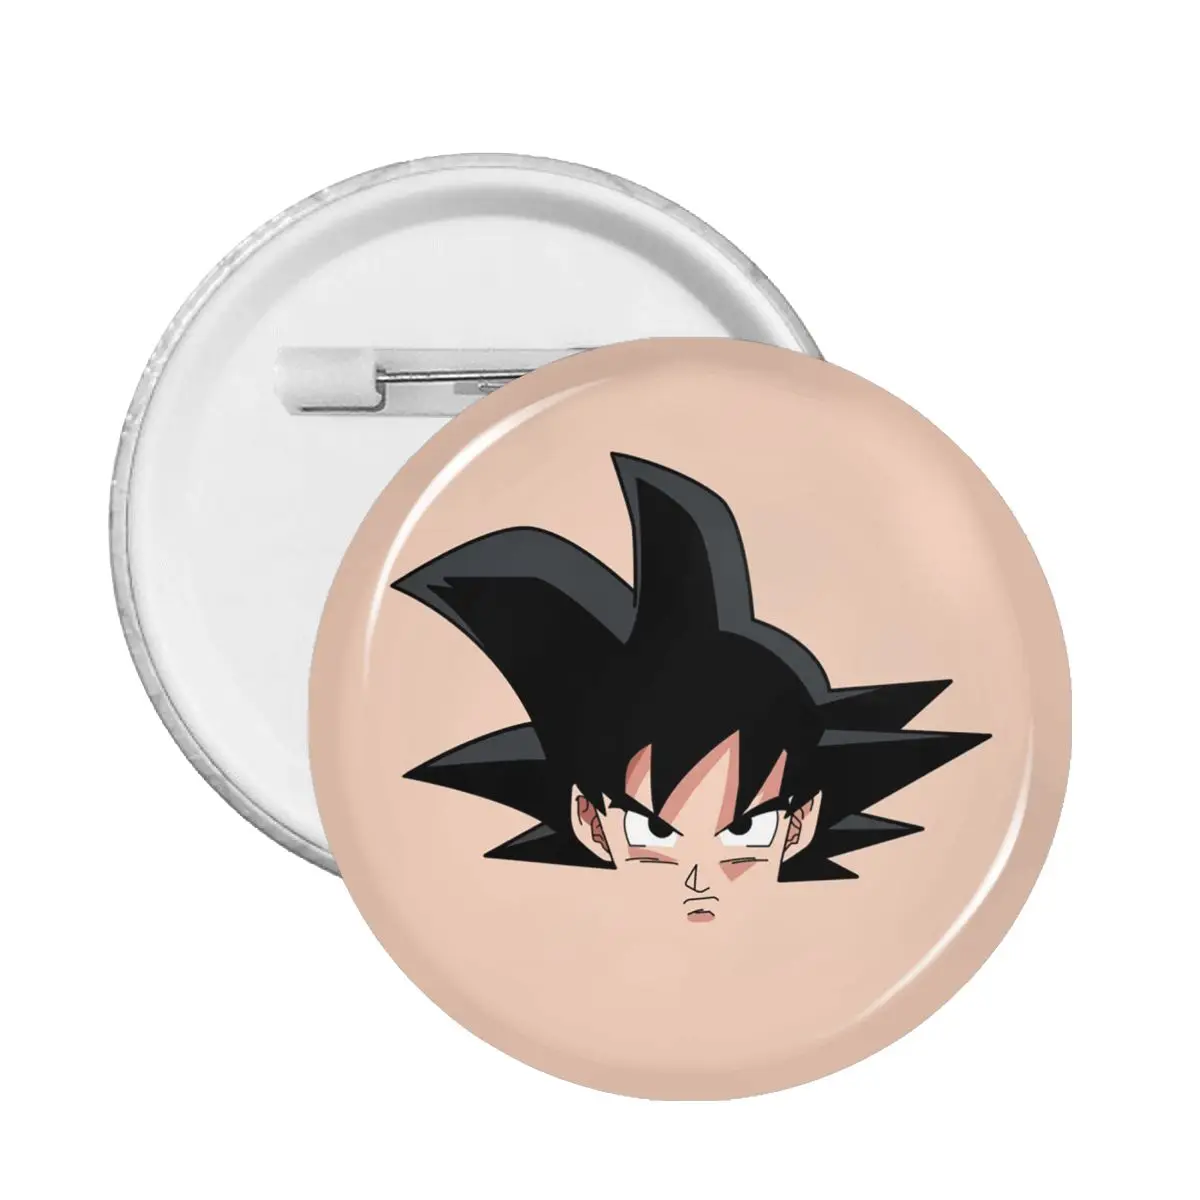 Son Goku Badges Japan Anime Cartoon Brooch for Bag Awesome Lapel Pins 59mm Jewelry Accessories Gift